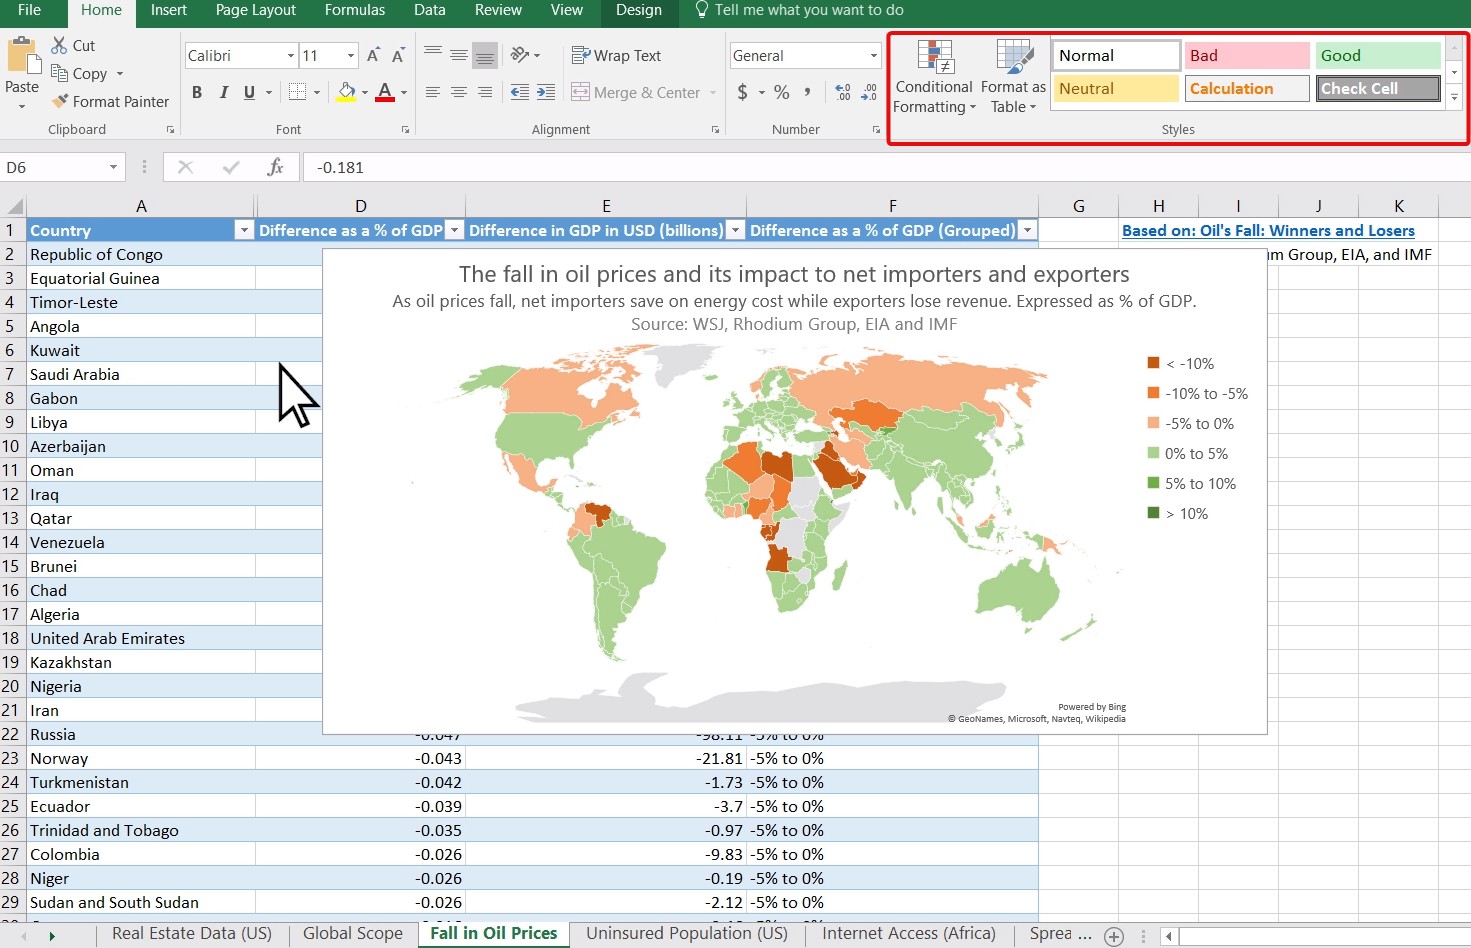 How to create a geographic heat map in Excel.